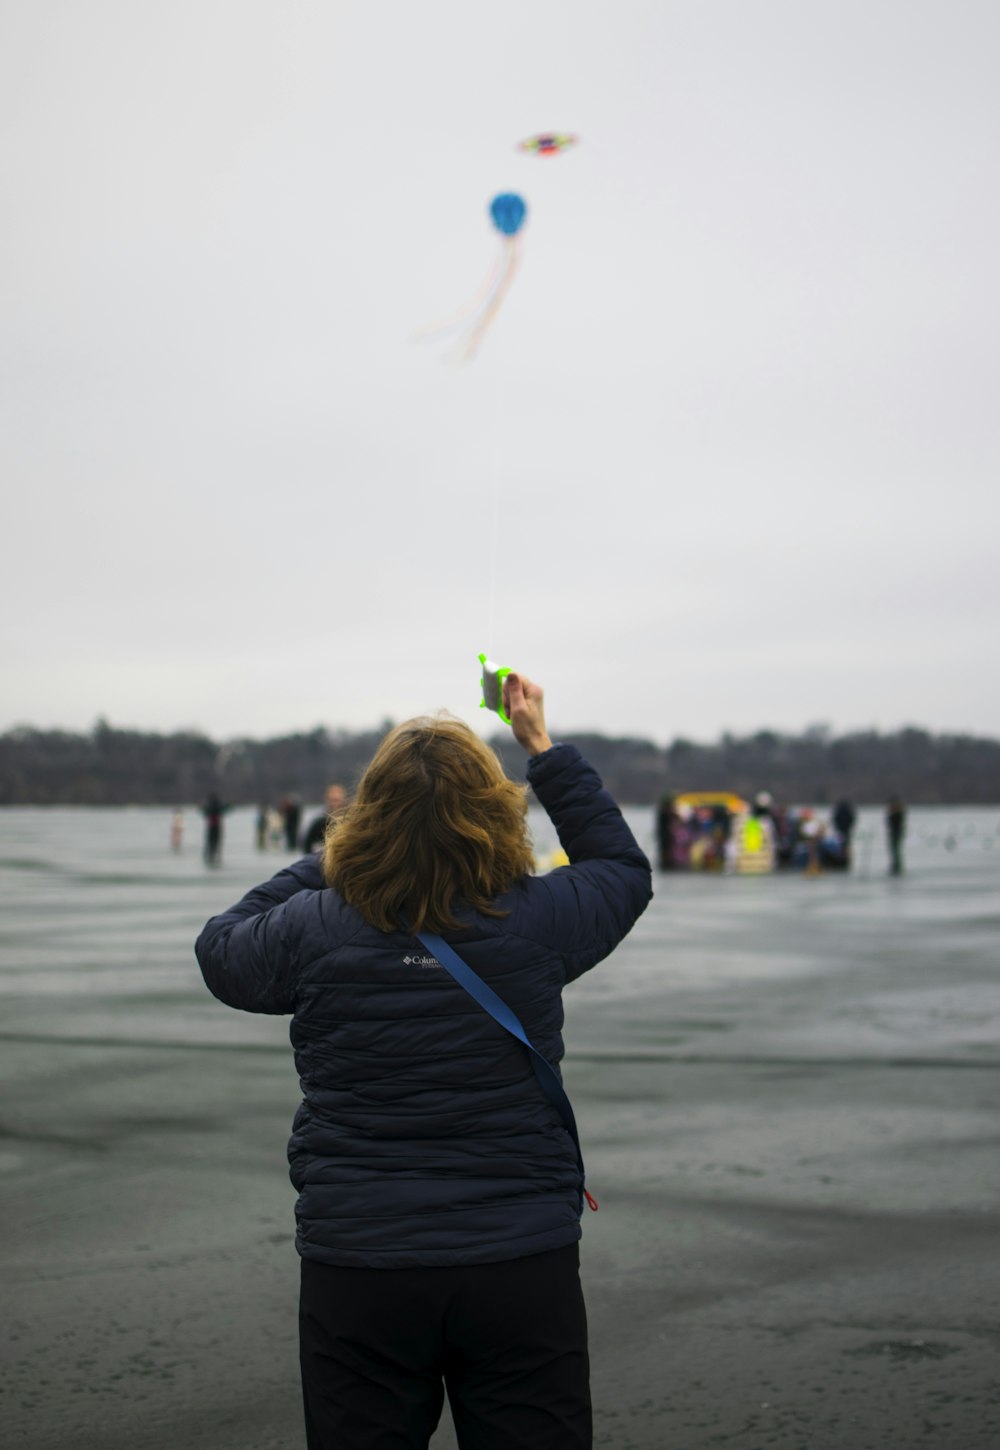 a woman is flying a kite on the beach